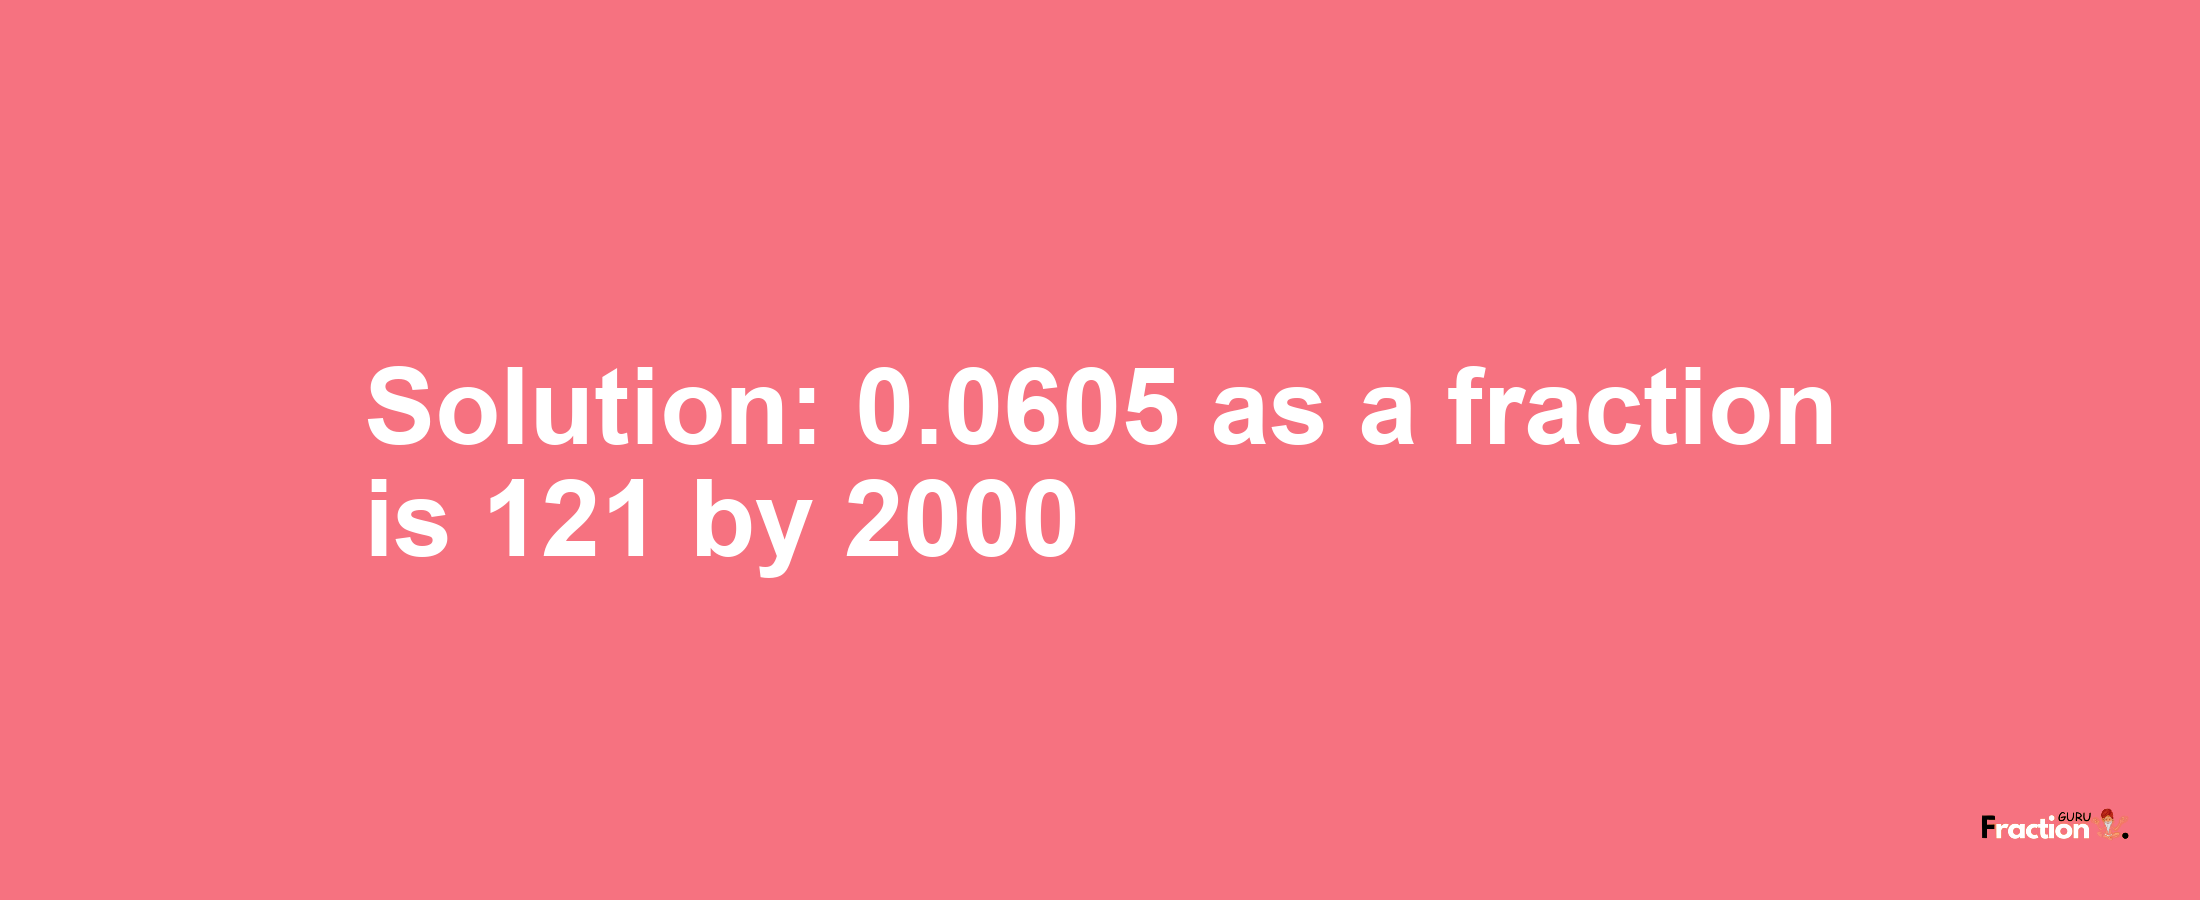 Solution:0.0605 as a fraction is 121/2000